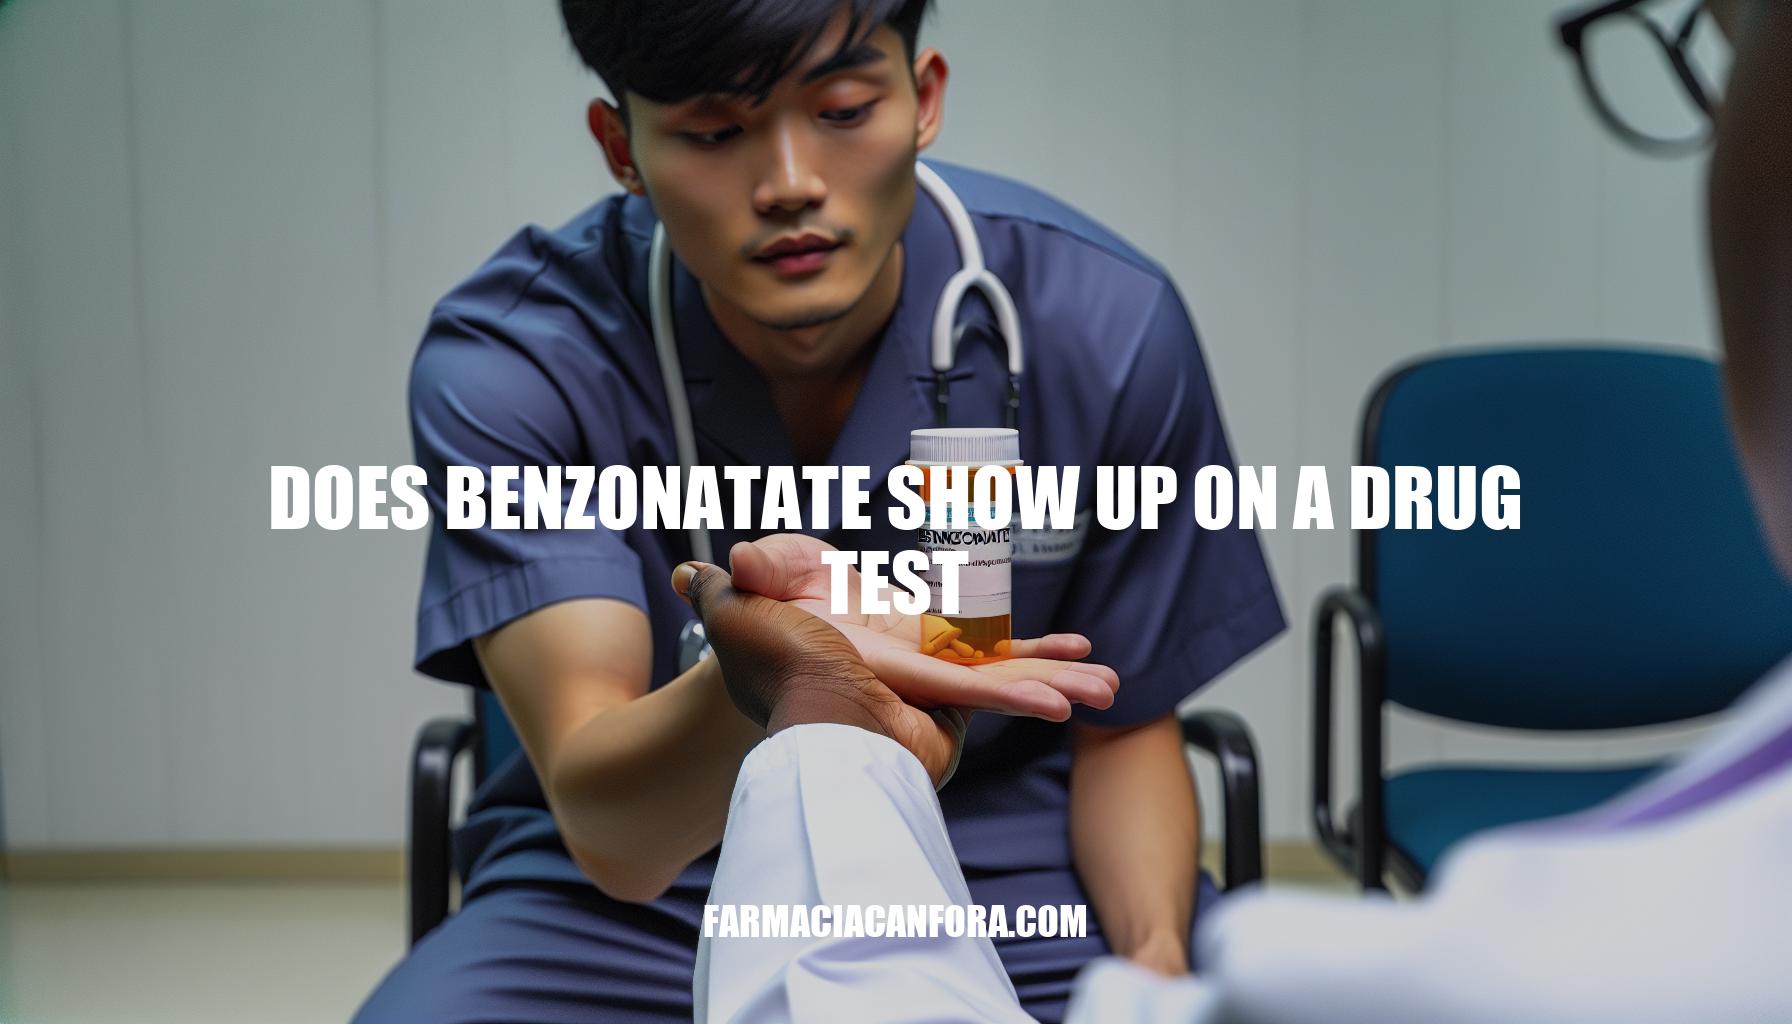 Does Benzonatate Show Up on a Drug Test